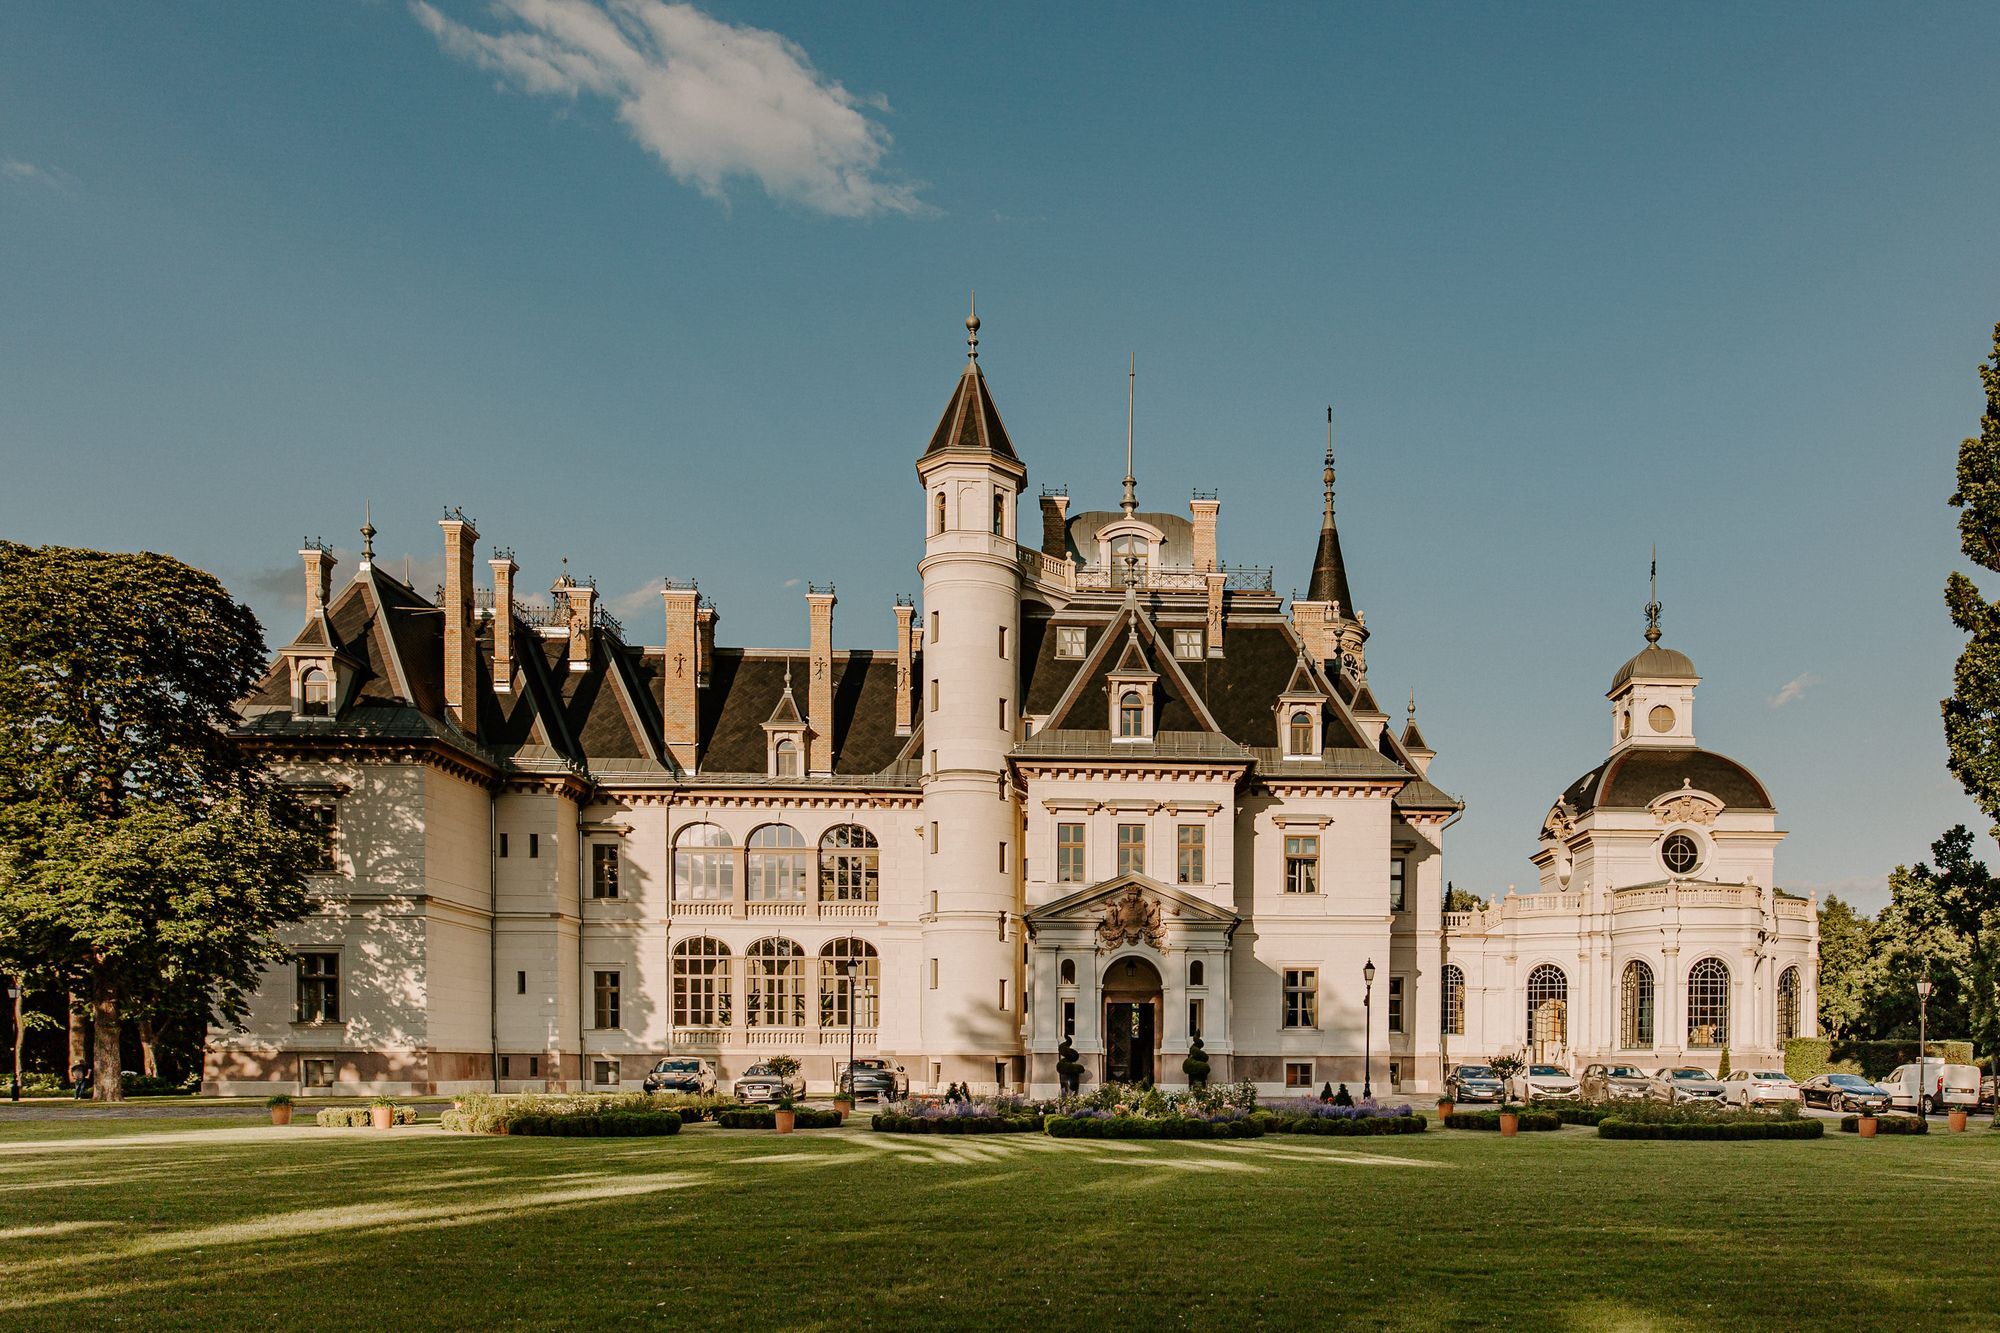 Hungarian hotels recognized with tourism design awards